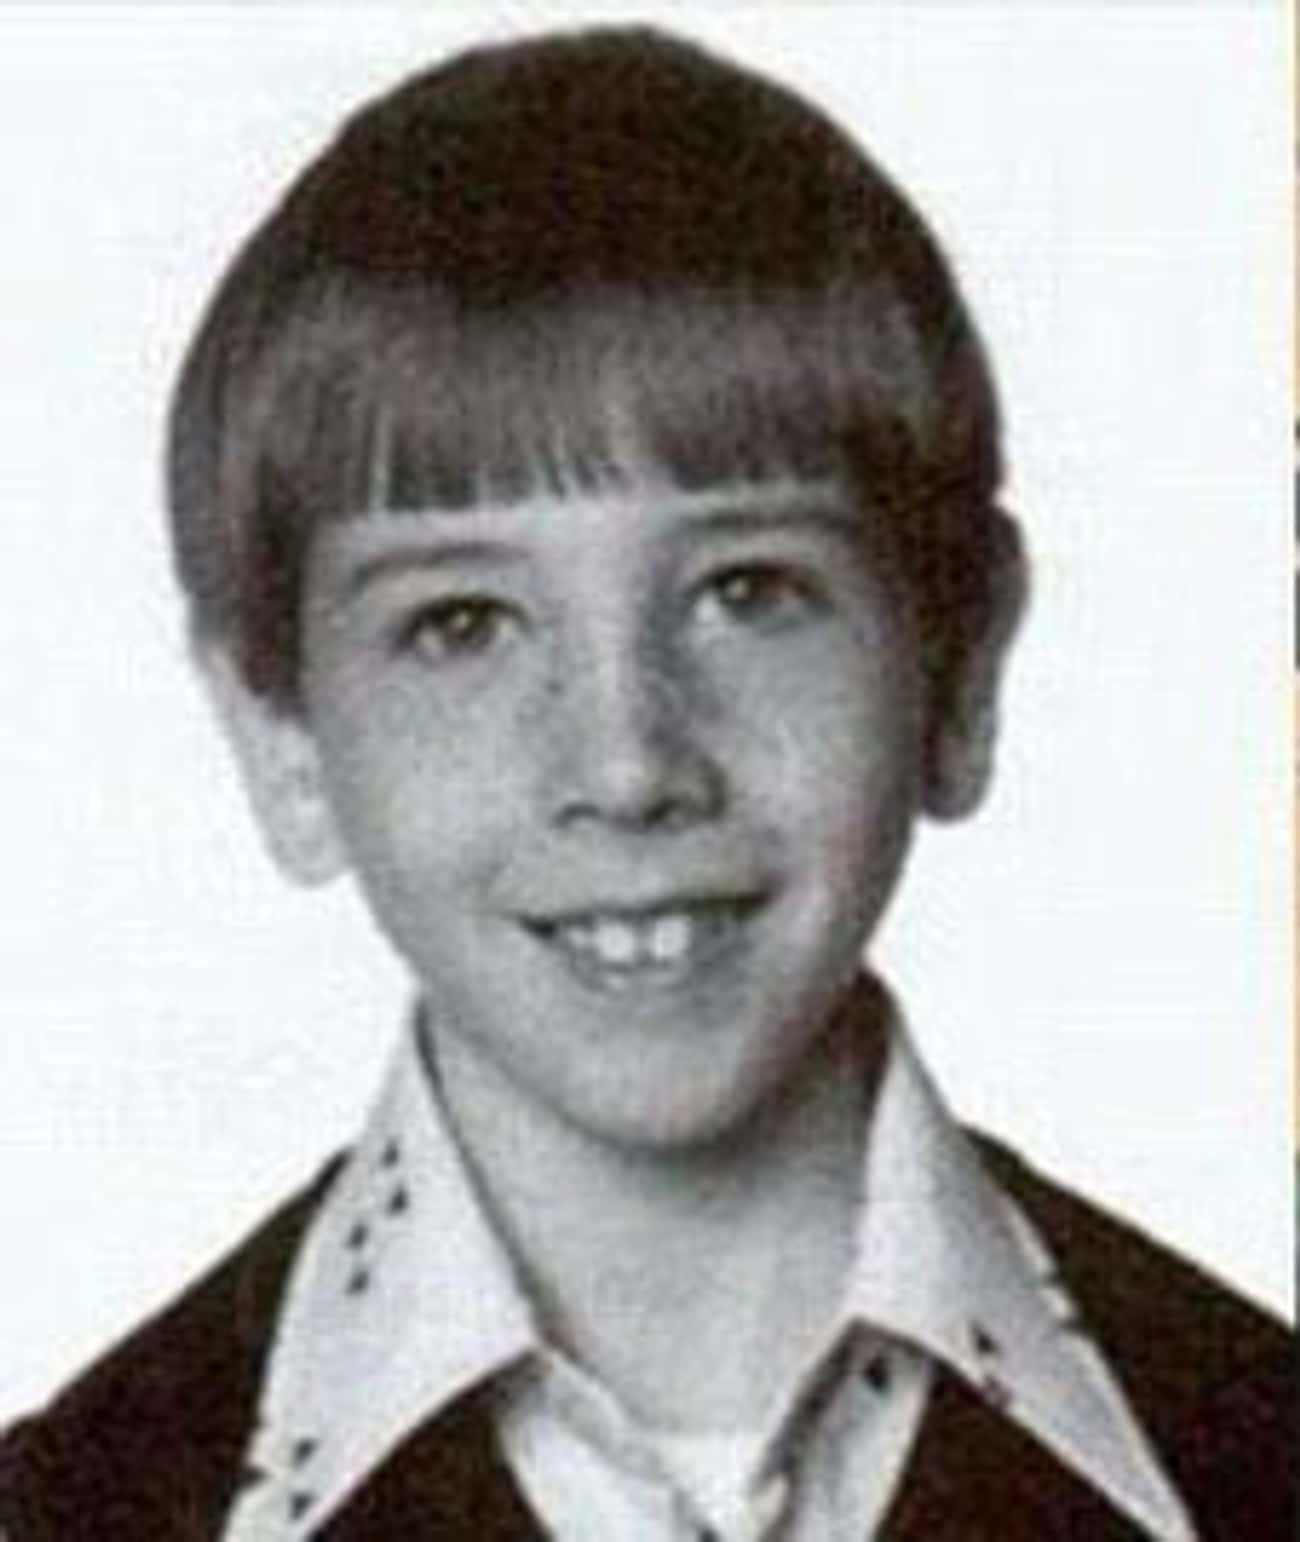 Young Marilyn Manson as a Child